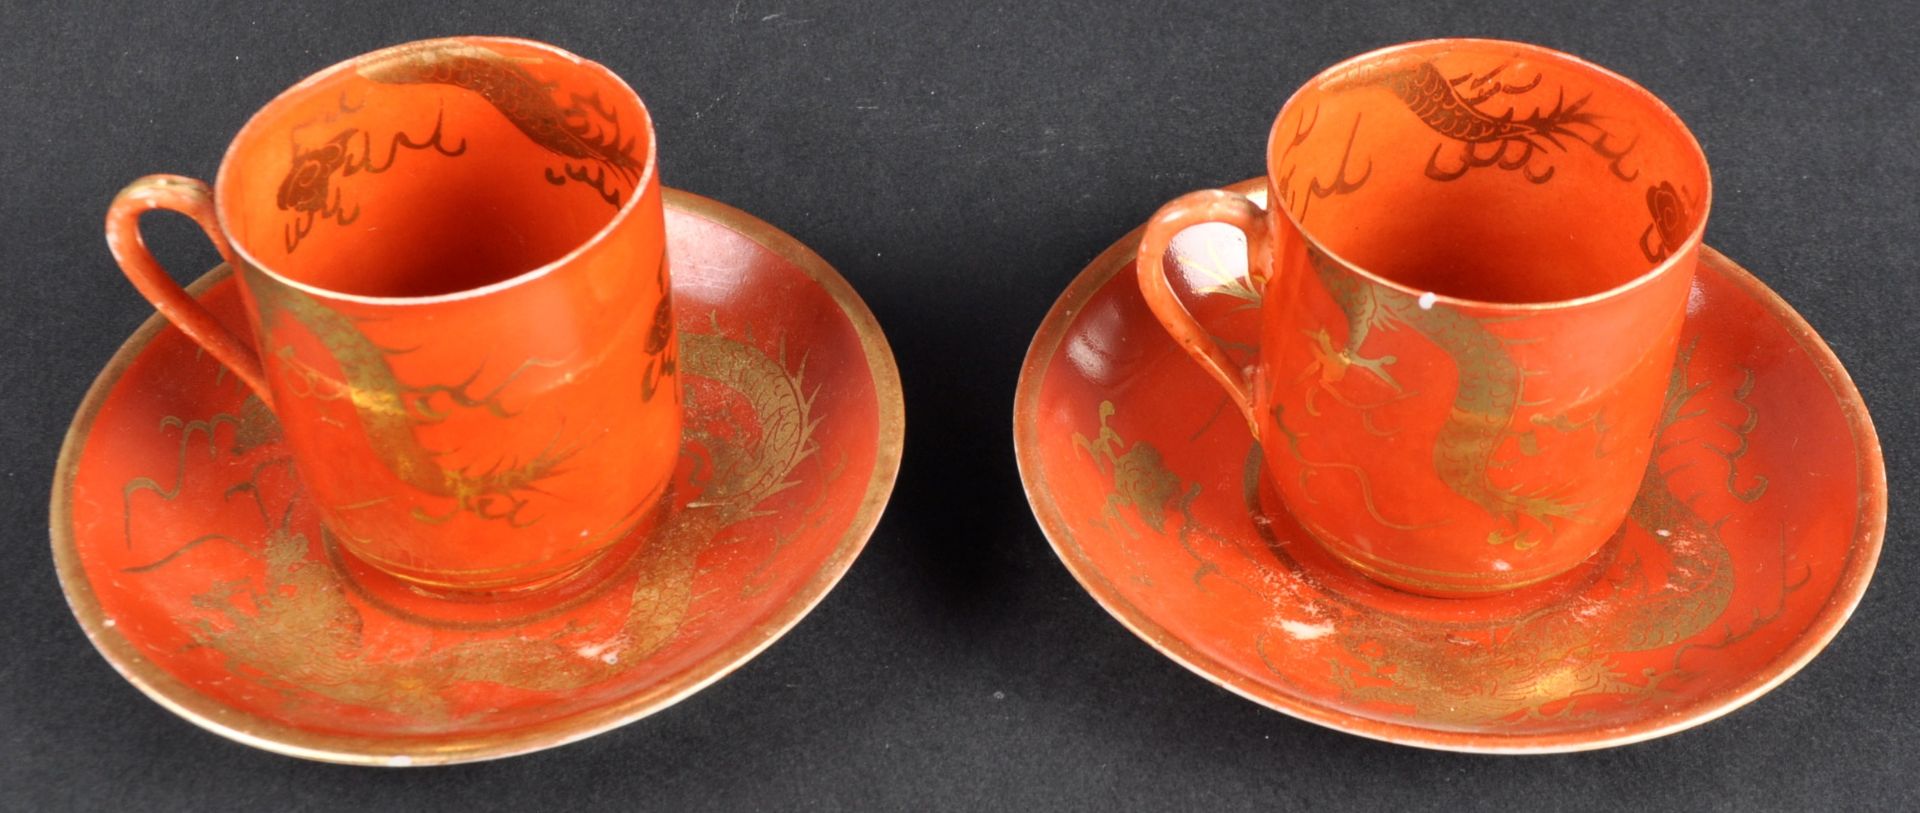 PAIR OF 19TH CENTURY CHINESE PORCELAIN TEA CUPS & SAUCERS - Image 2 of 6